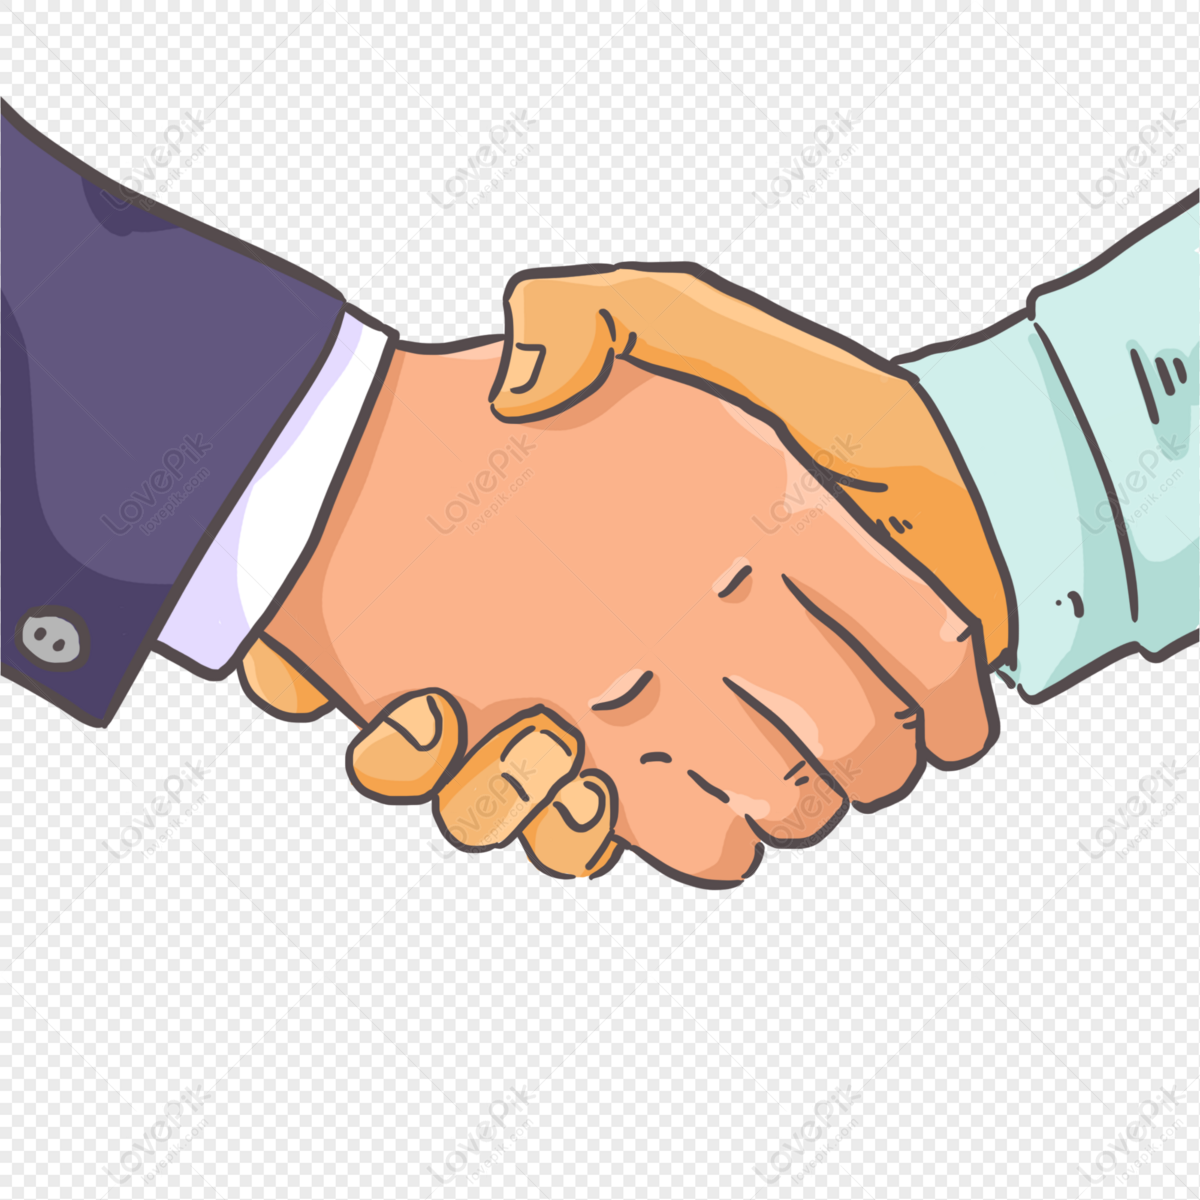 Hand Drawn Cartoon Business People Shaking Hands PNG Image Free Download  And Clipart Image For Free Download - Lovepik | 401514201